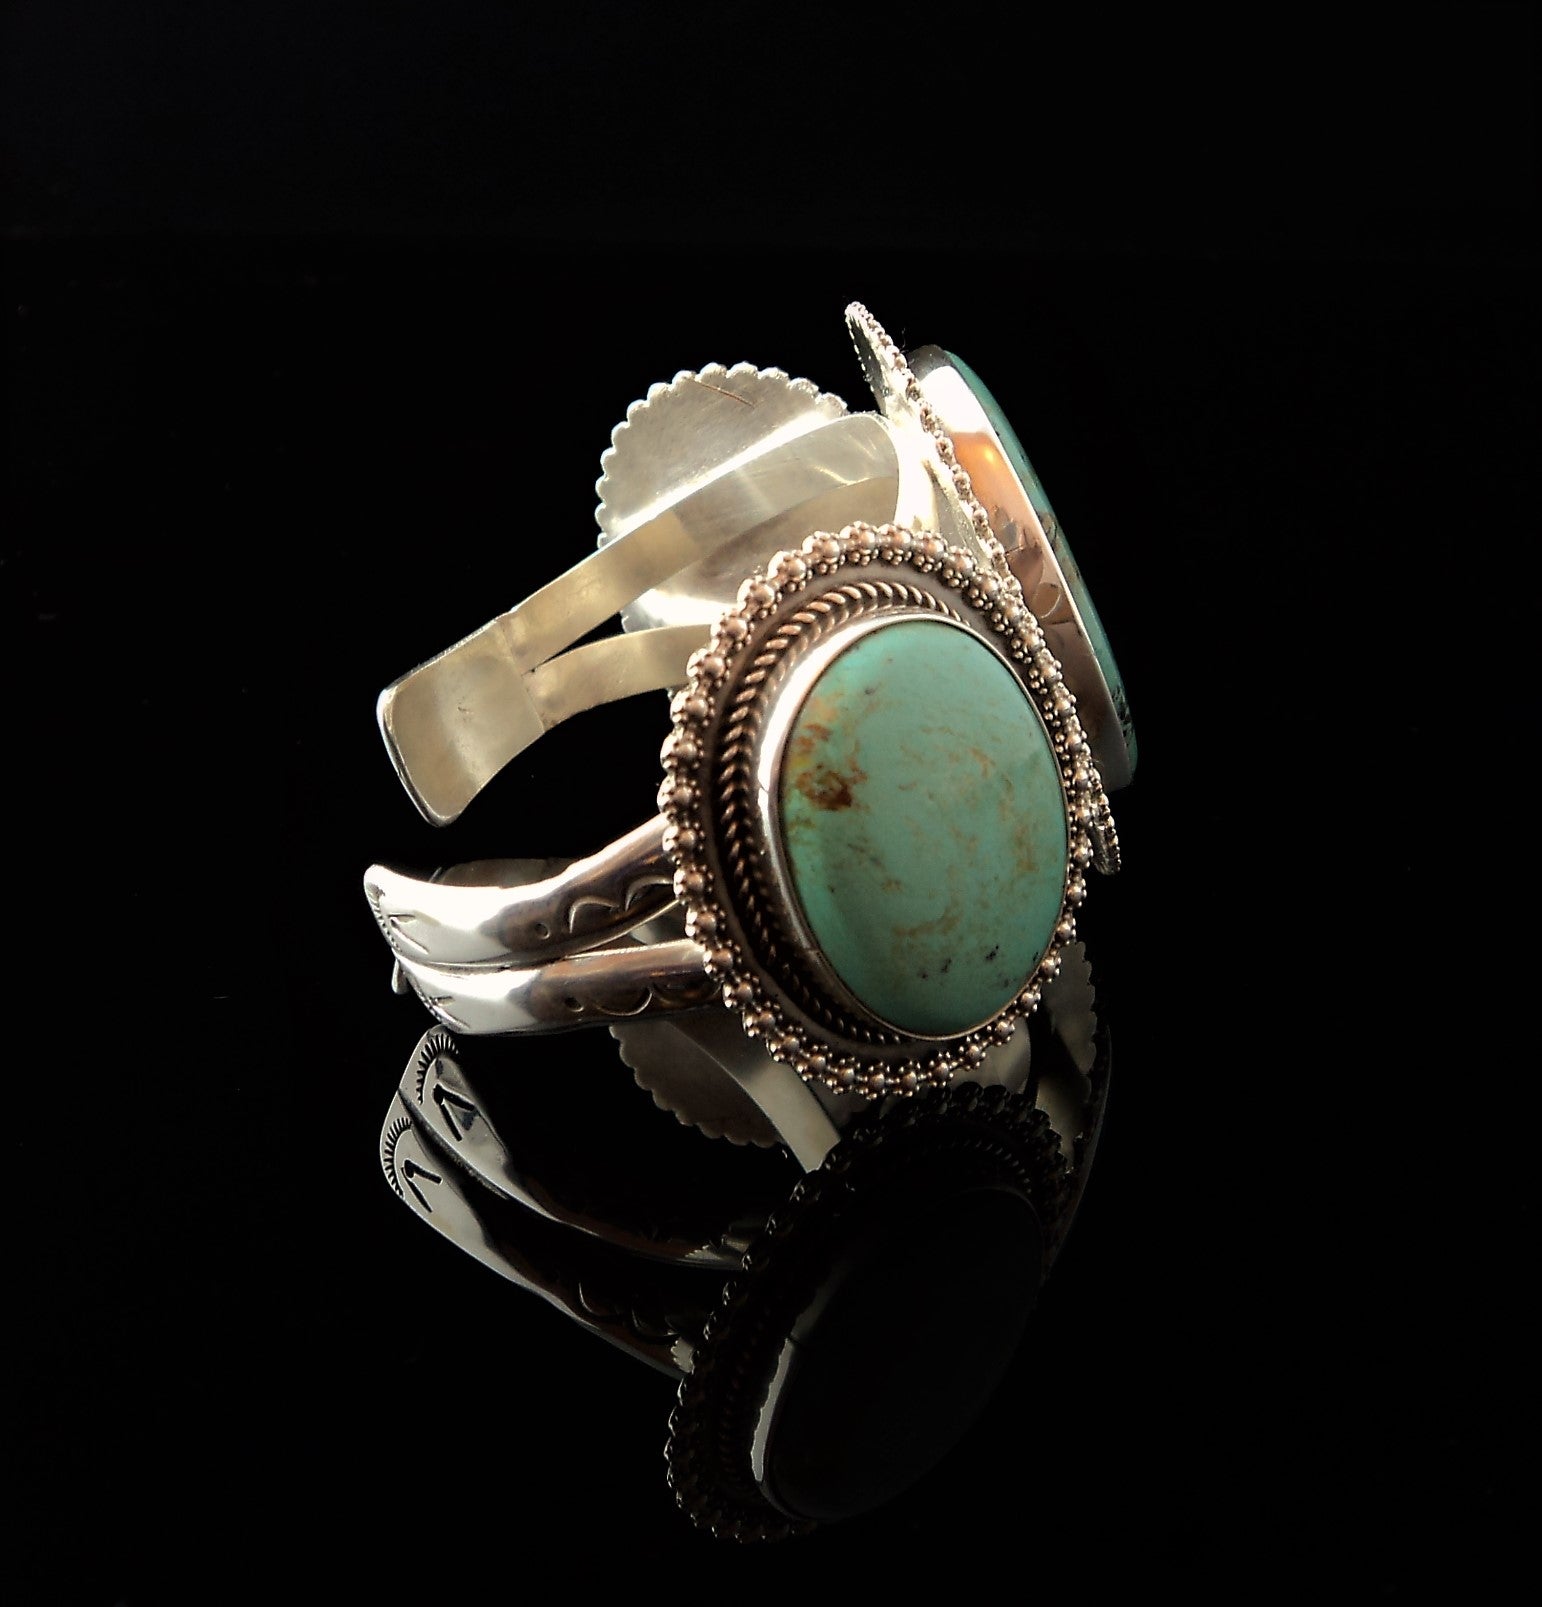 Native American Sterling Silver and Turquoise Cuff Bracelet